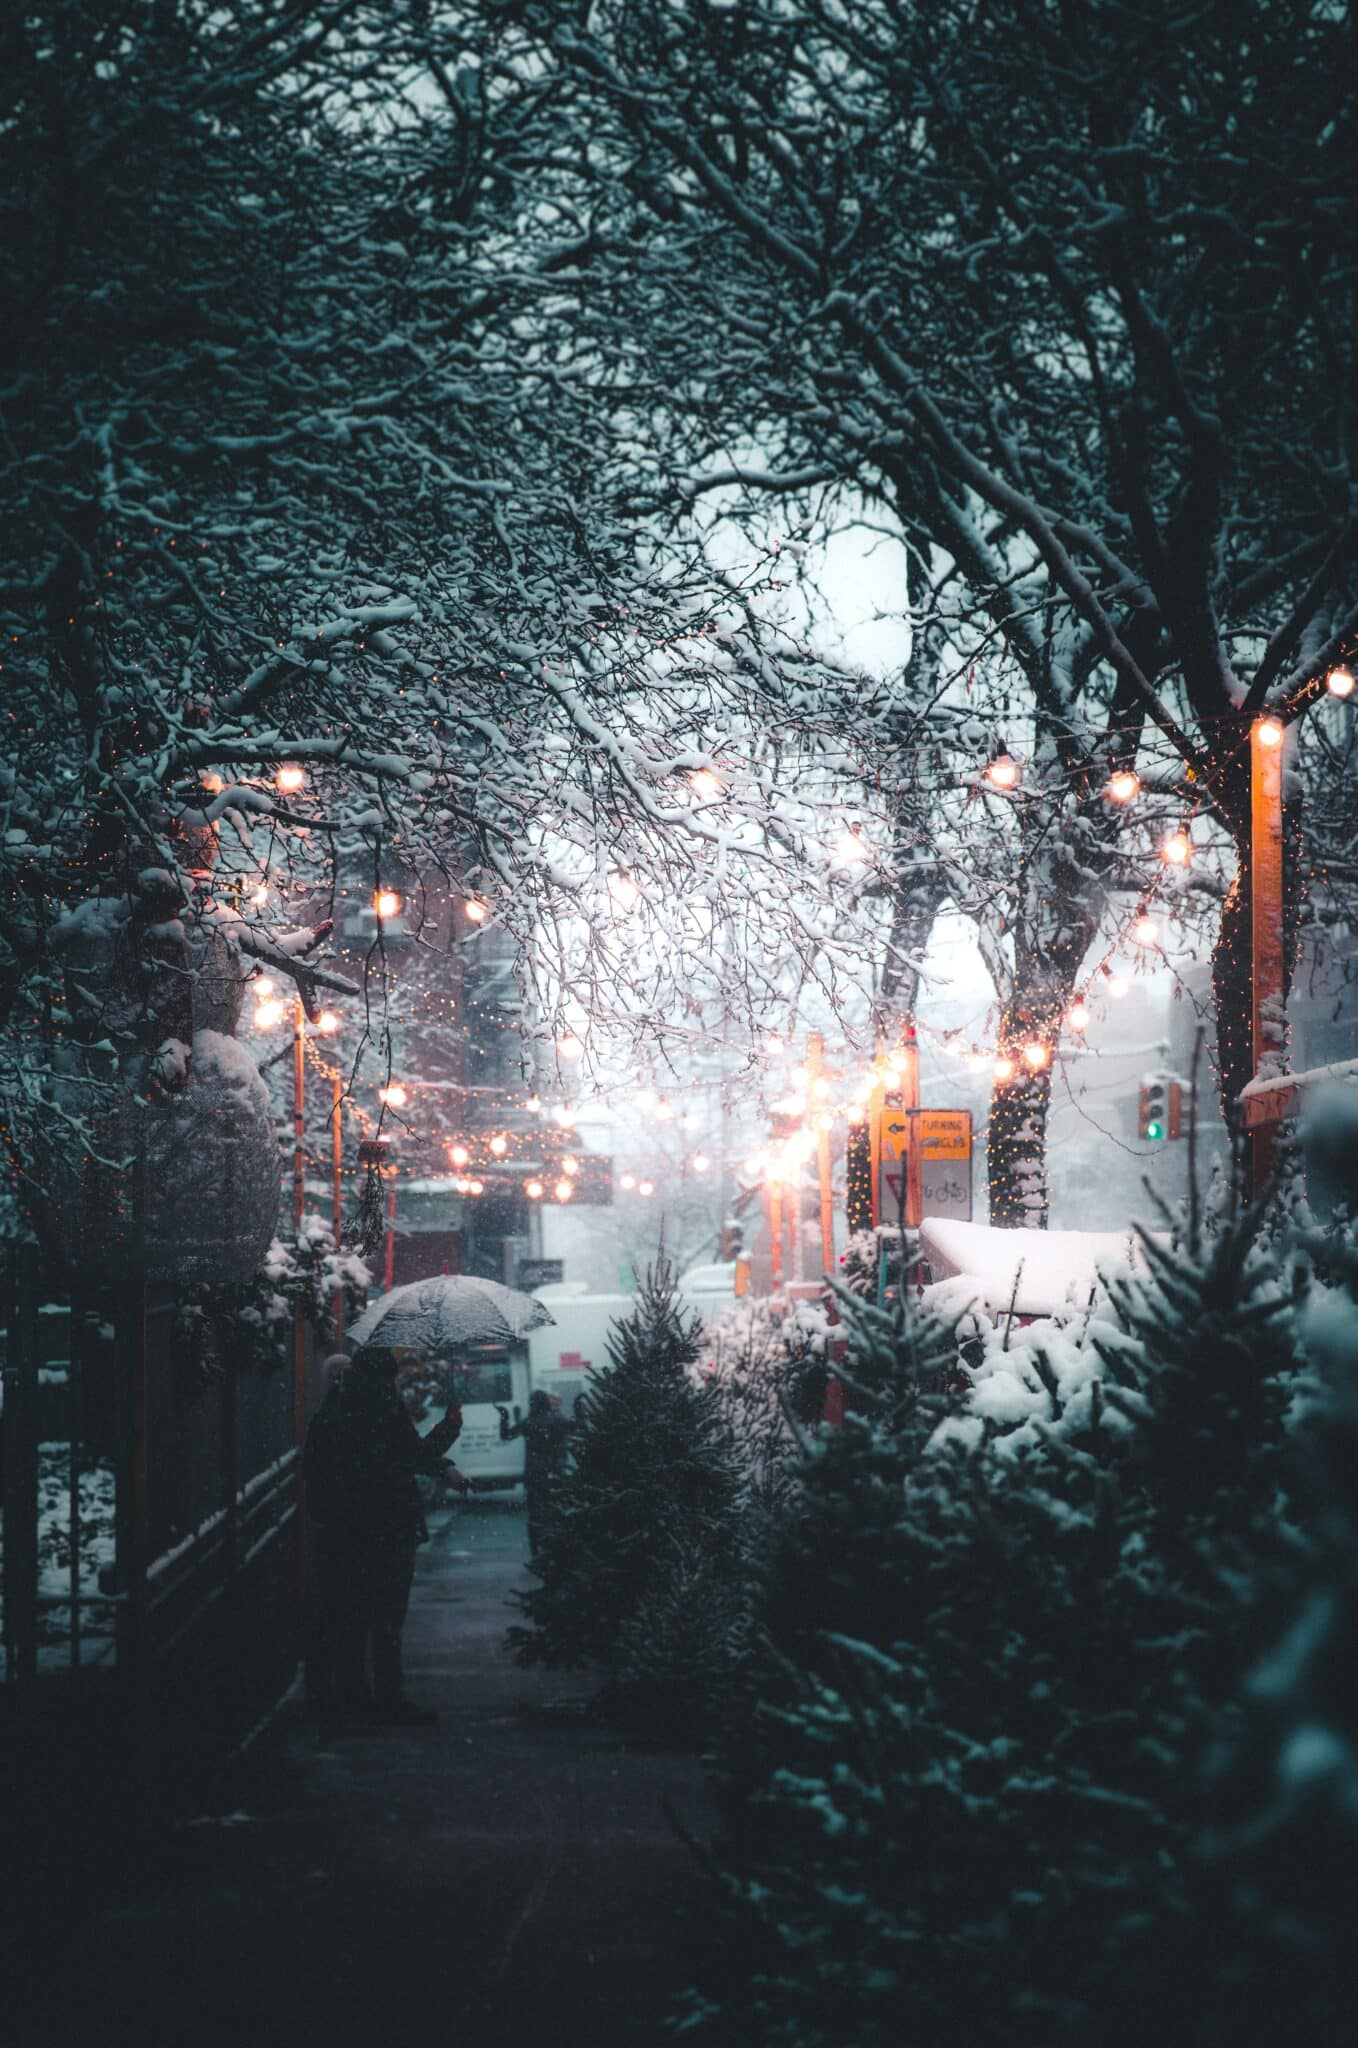 A snowy street with trees and lights - Christmas, cute Christmas, winter, cozy, snow, magic, road, Christmas iPhone, warm, white Christmas, Texas